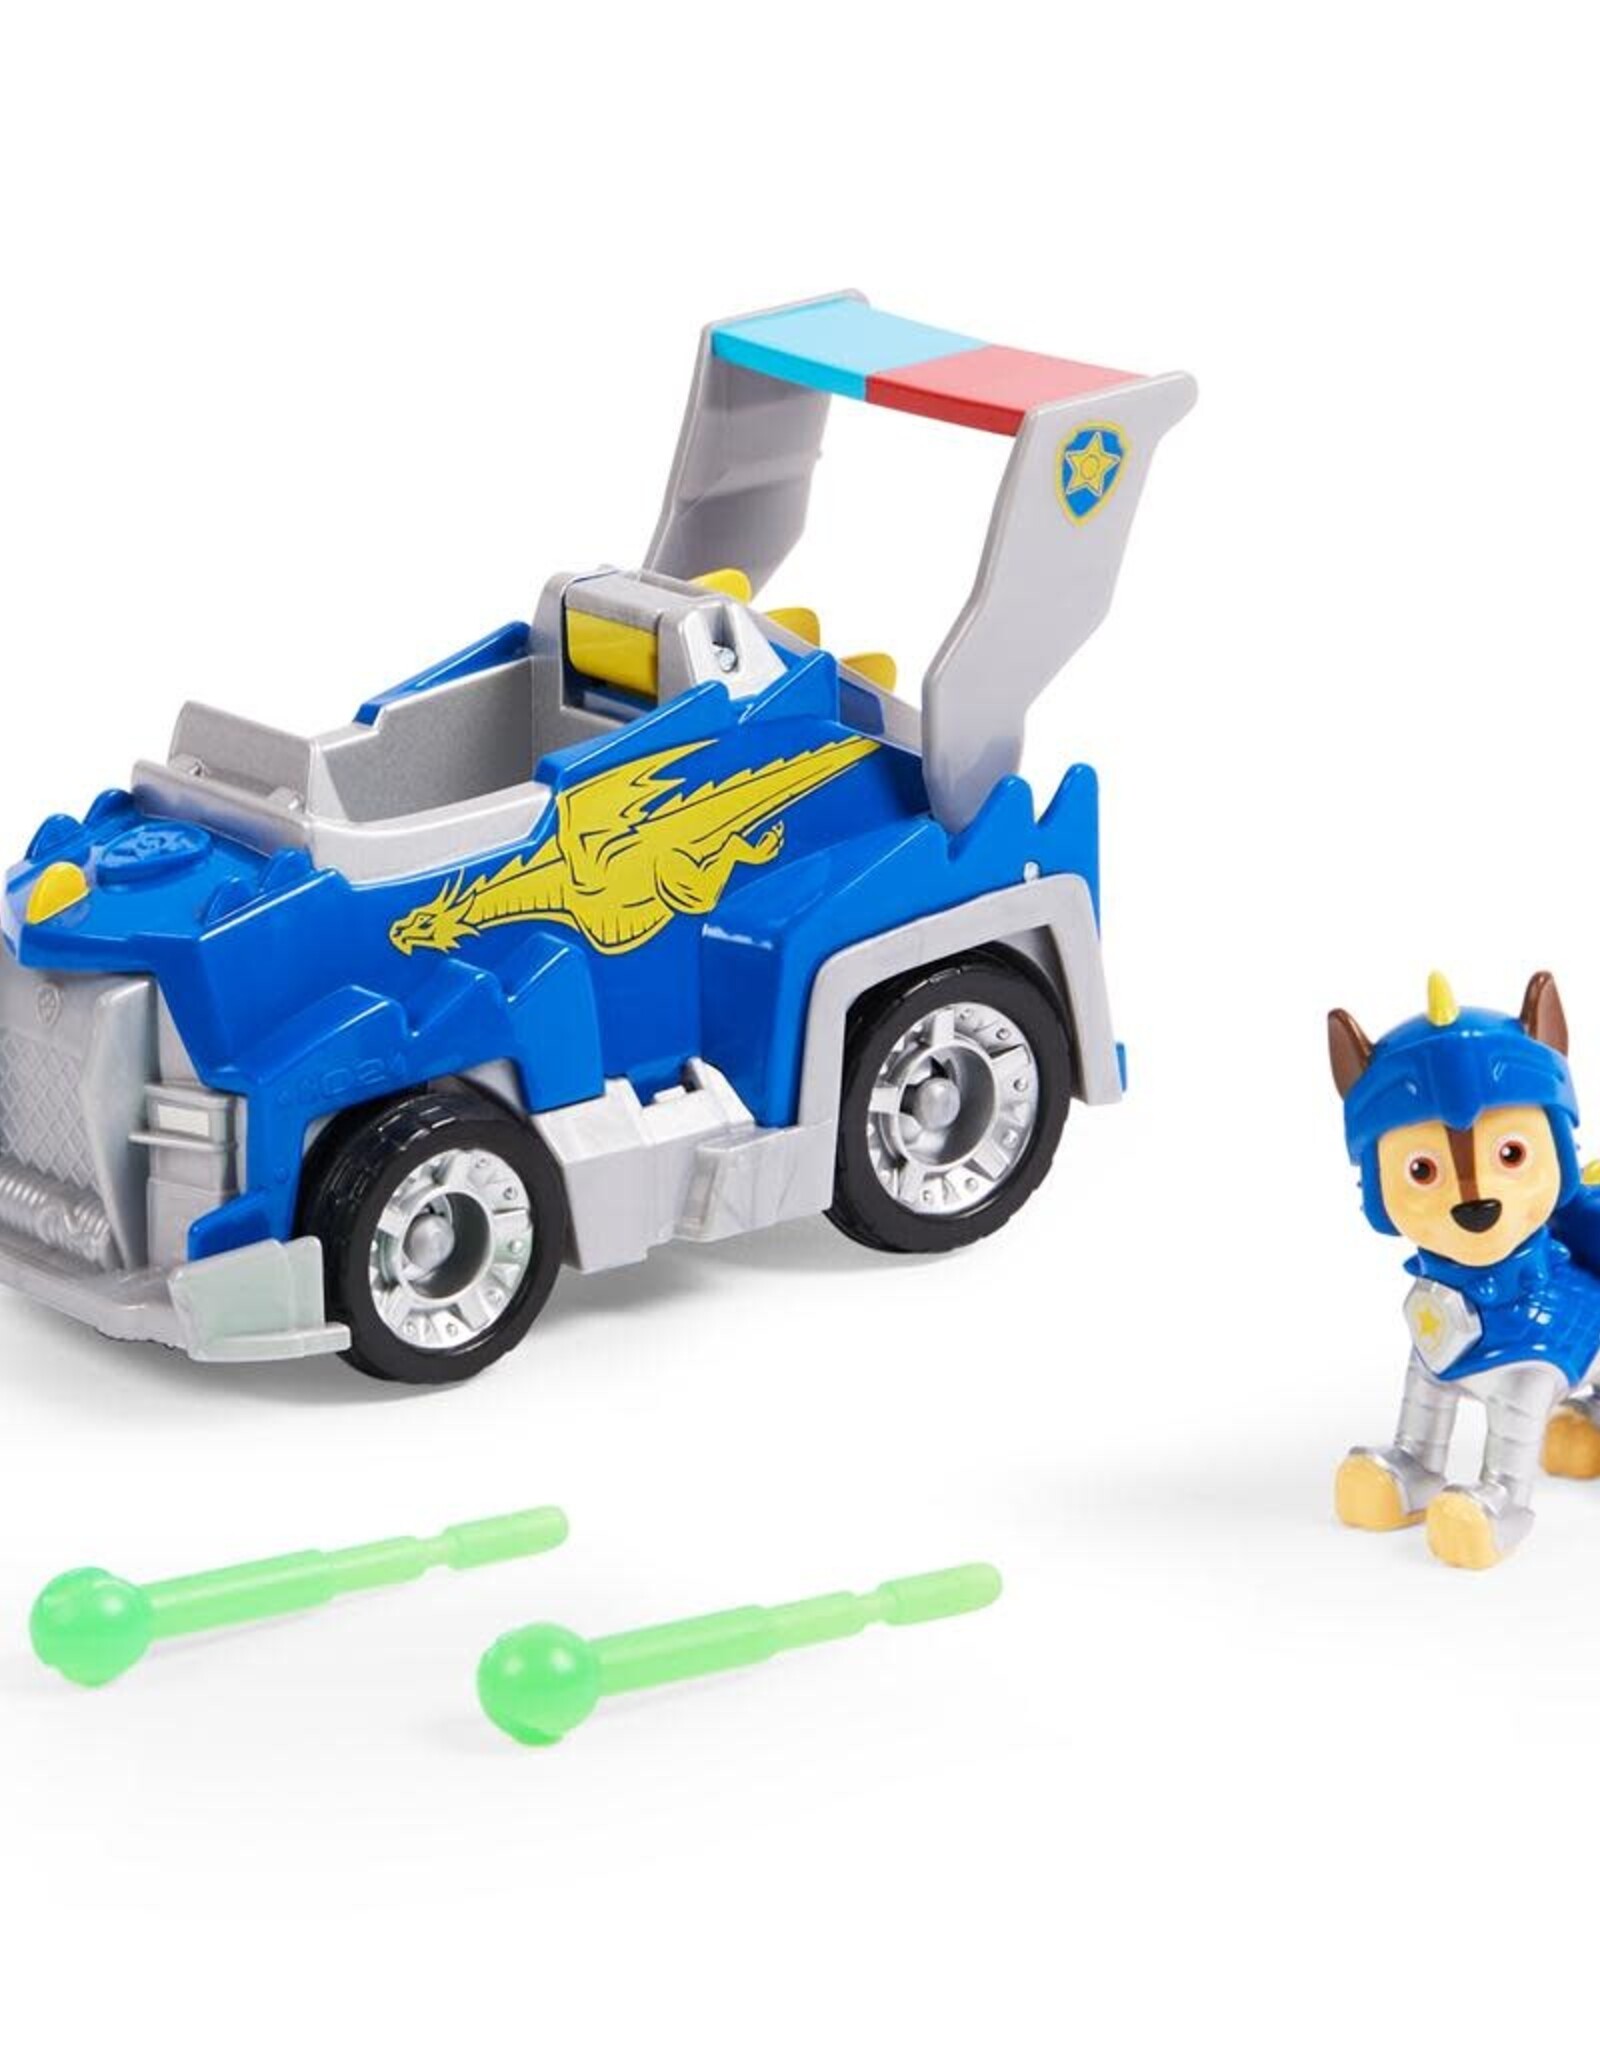 Gund/Spinmaster PAW Patrol, Rescue Knights Chase Transforming Toy